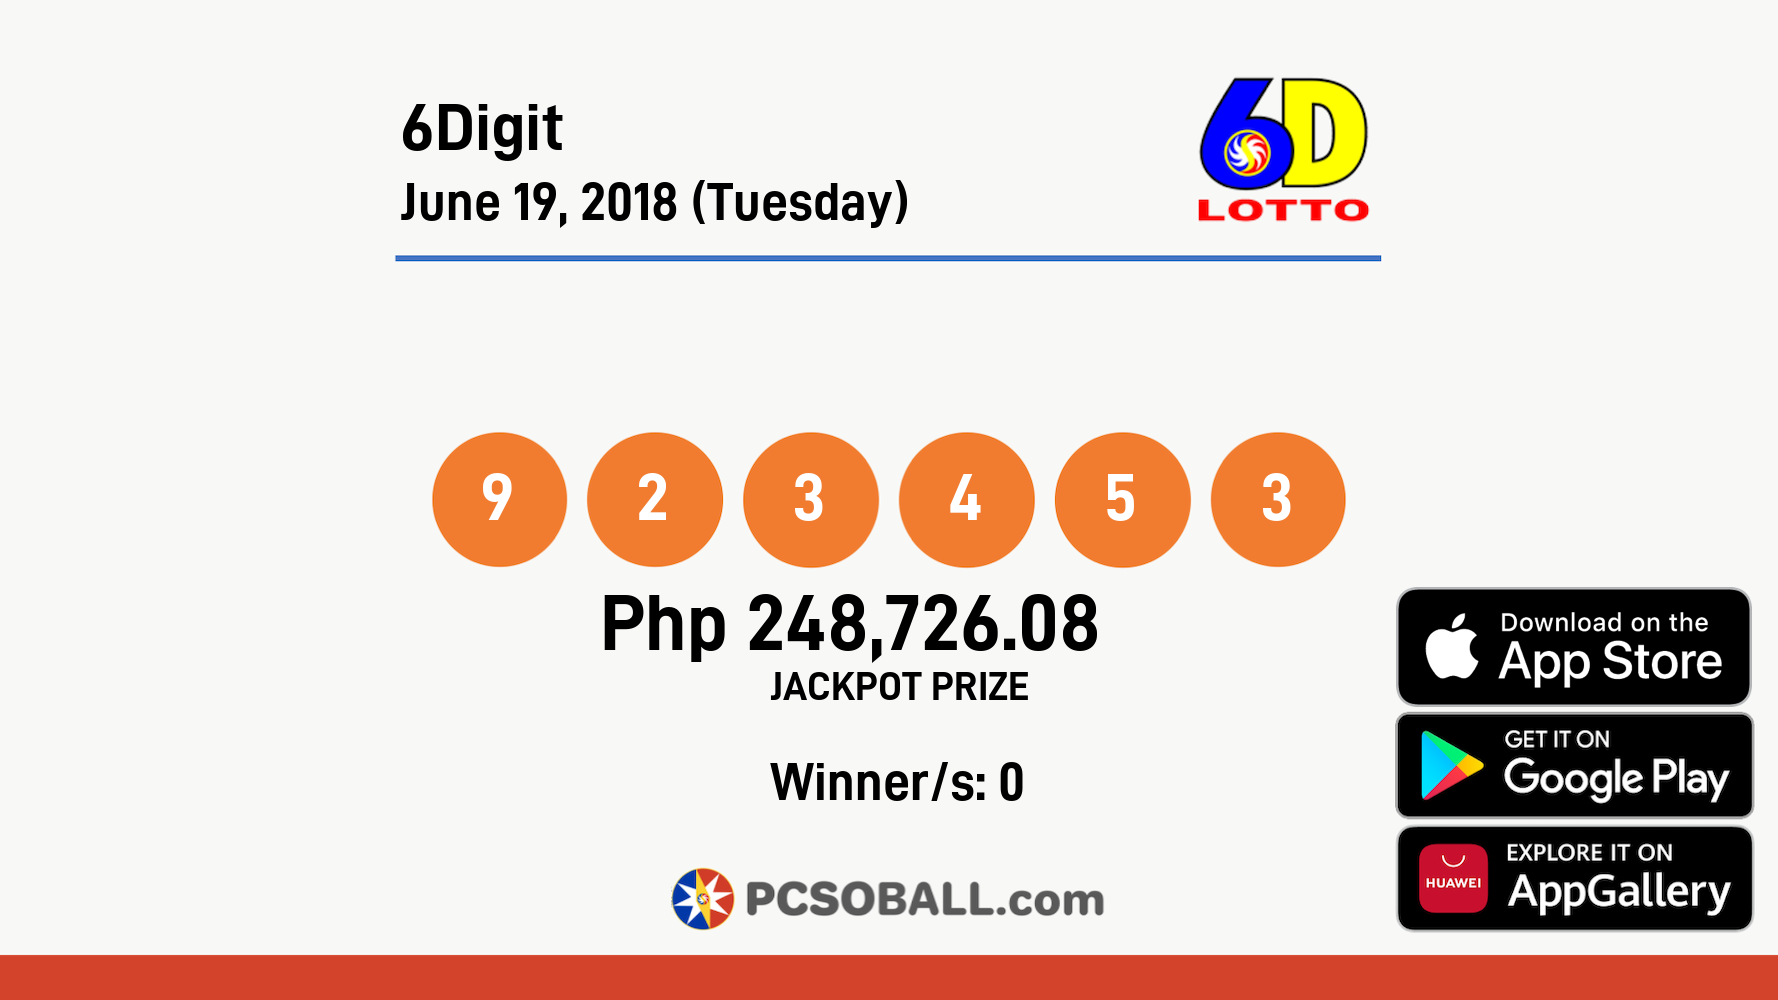 6Digit June 19, 2018 (Tuesday) Result